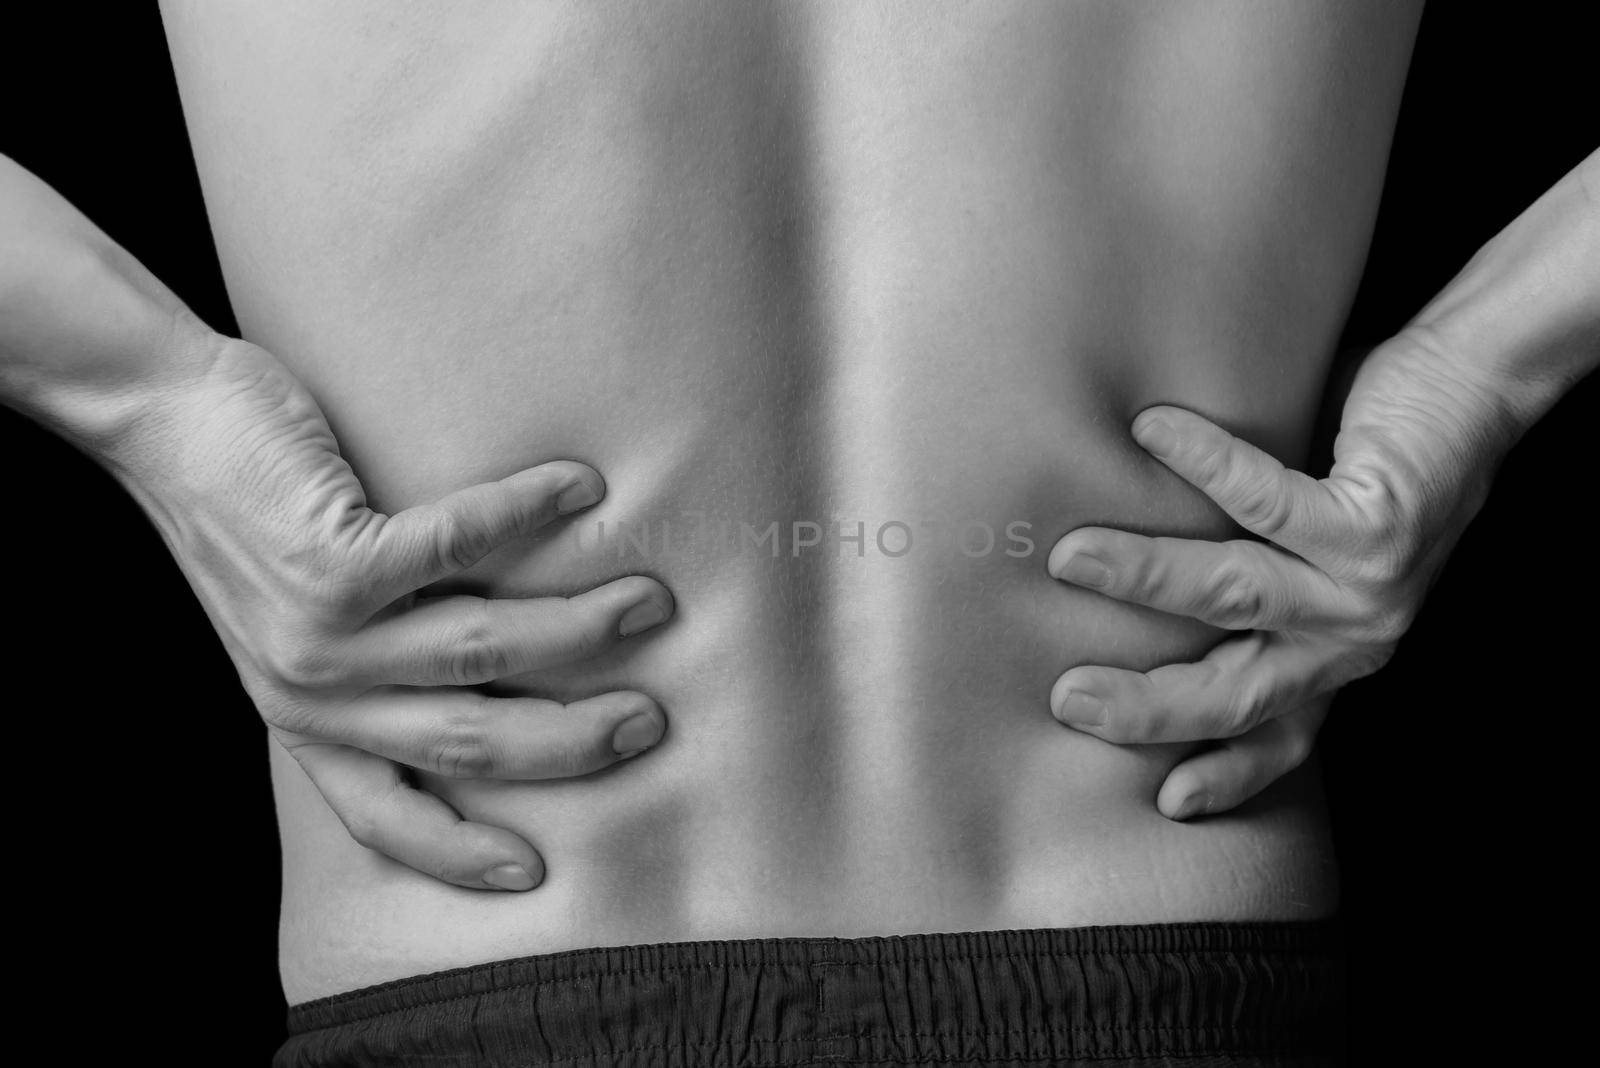 Acute pain in a male lower back, black and white image